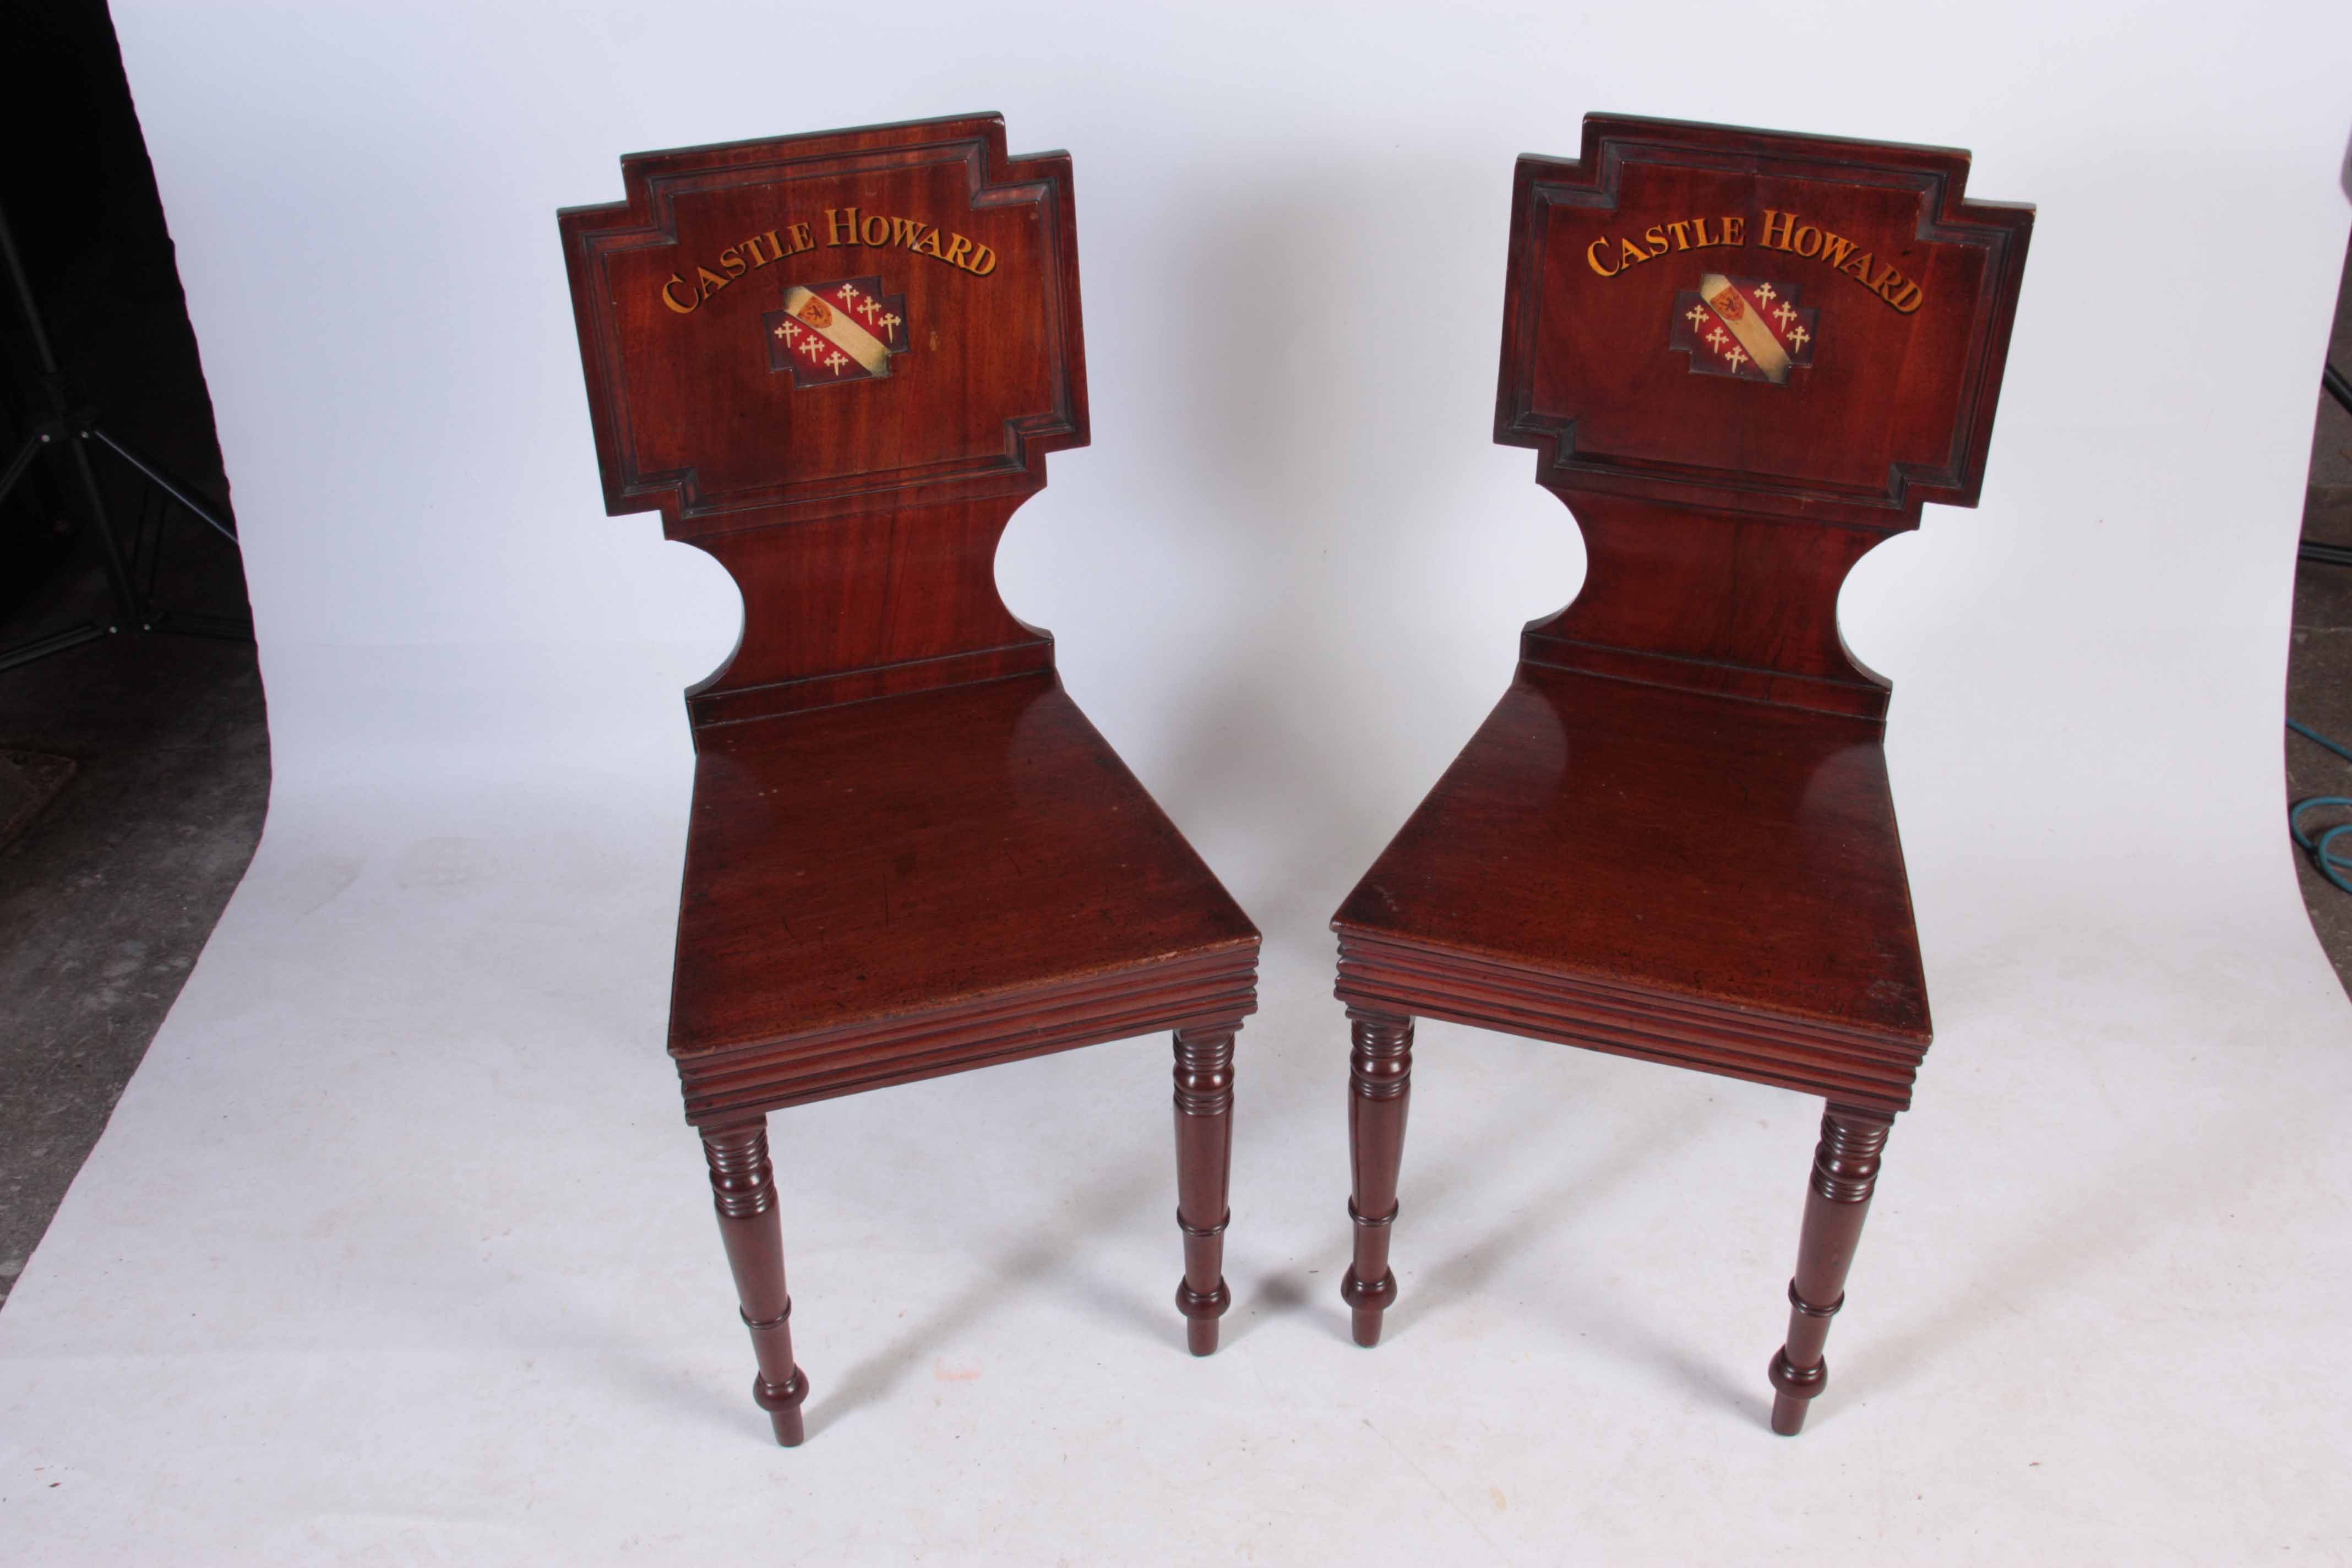 A PAIR OF LATE GEORGIAN MAHOGANY HALL CHAIRS with painted backs reading Castle Howard with coats - Image 6 of 9